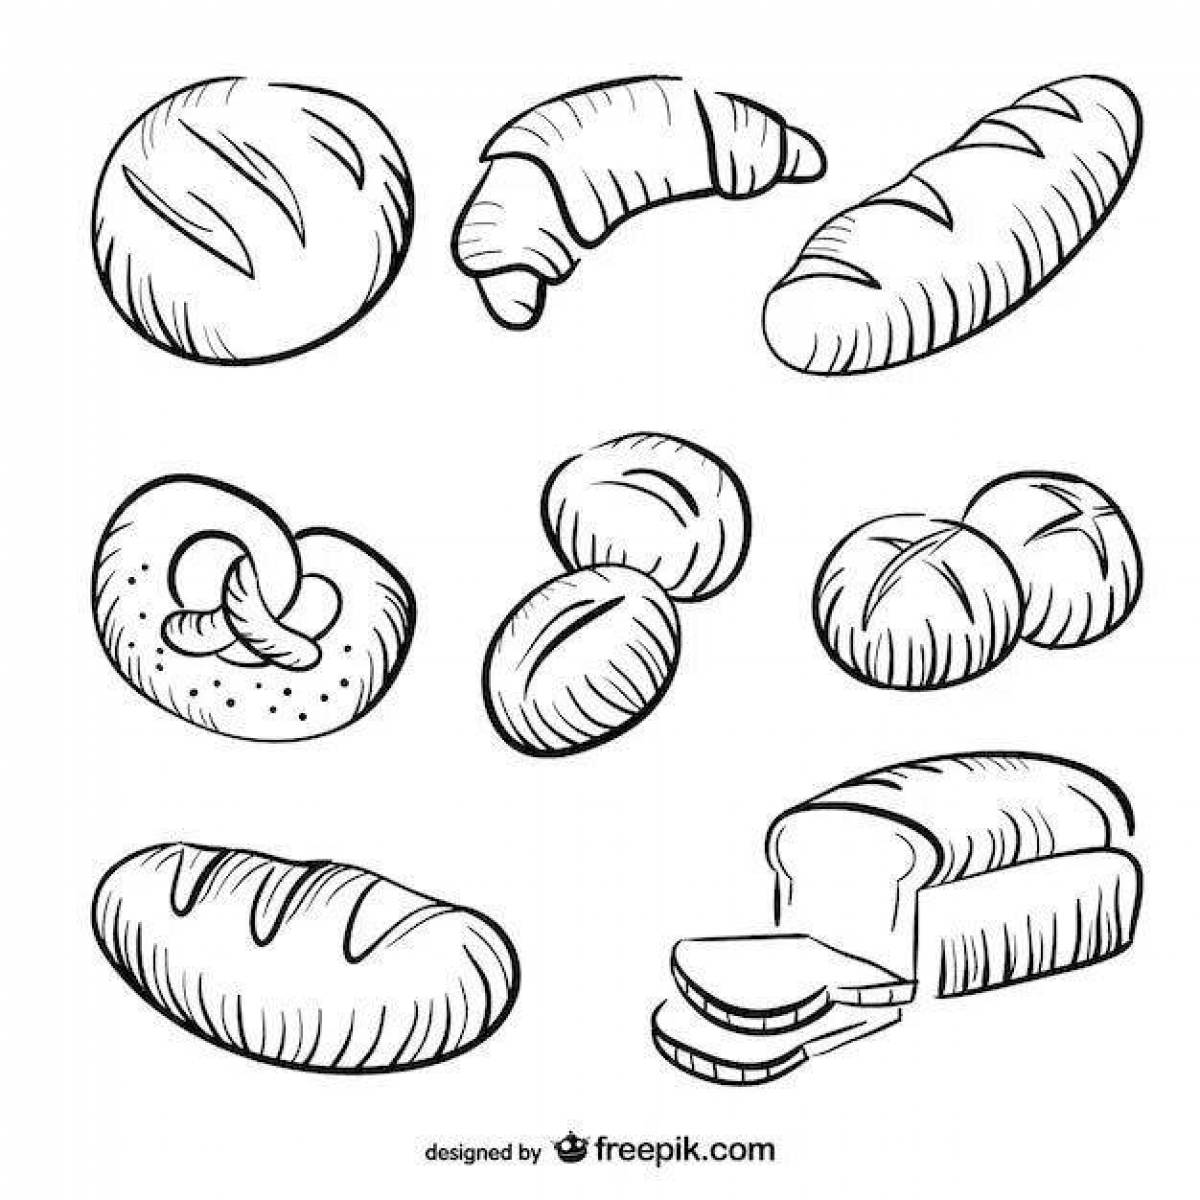 Seductive baked goods coloring pages for kids